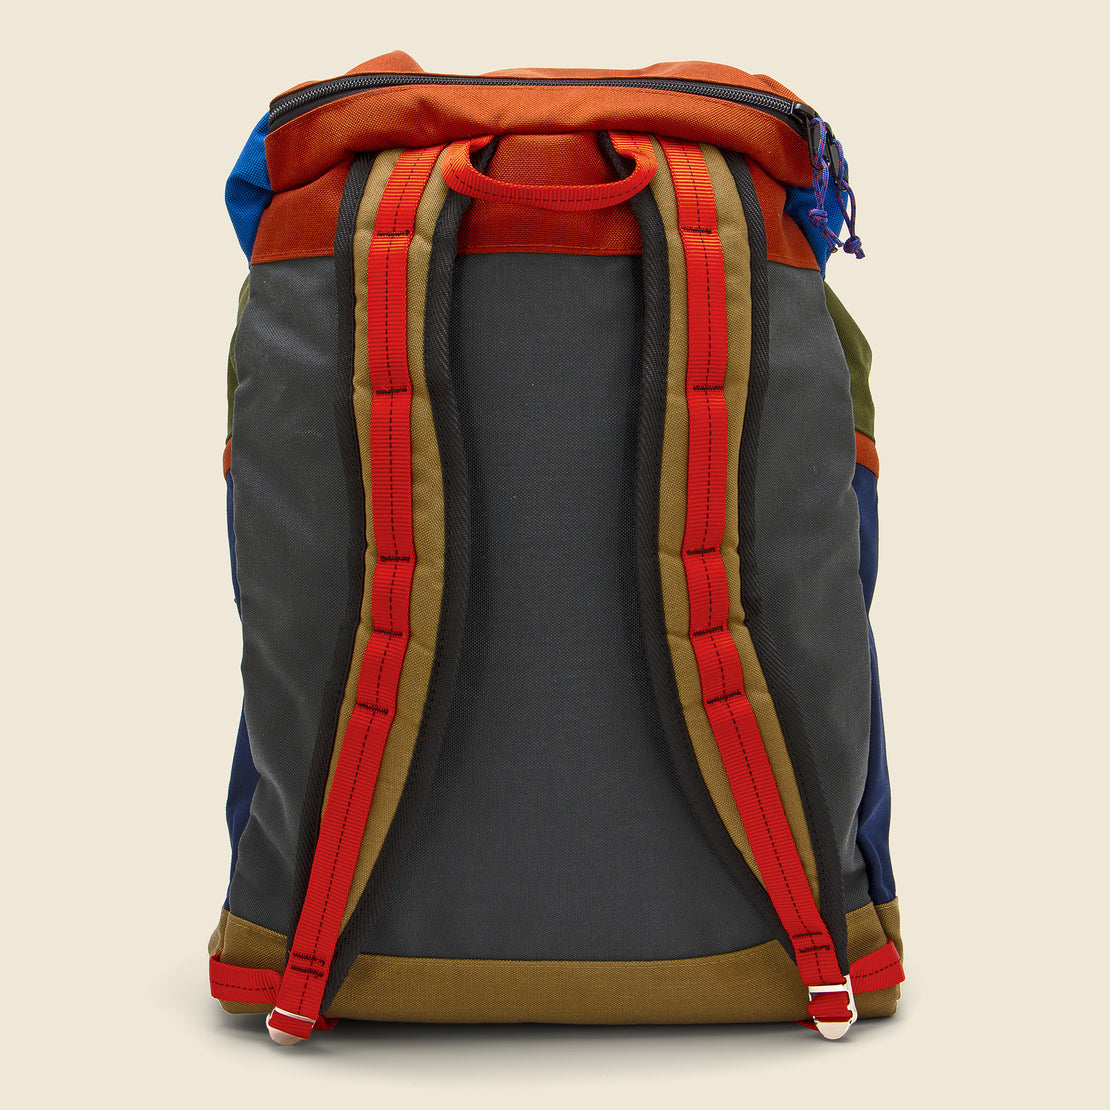 Large Climb Pack - Clay/Steel - Epperson Mountaineering - STAG Provisions - Accessories - Bags / Luggage